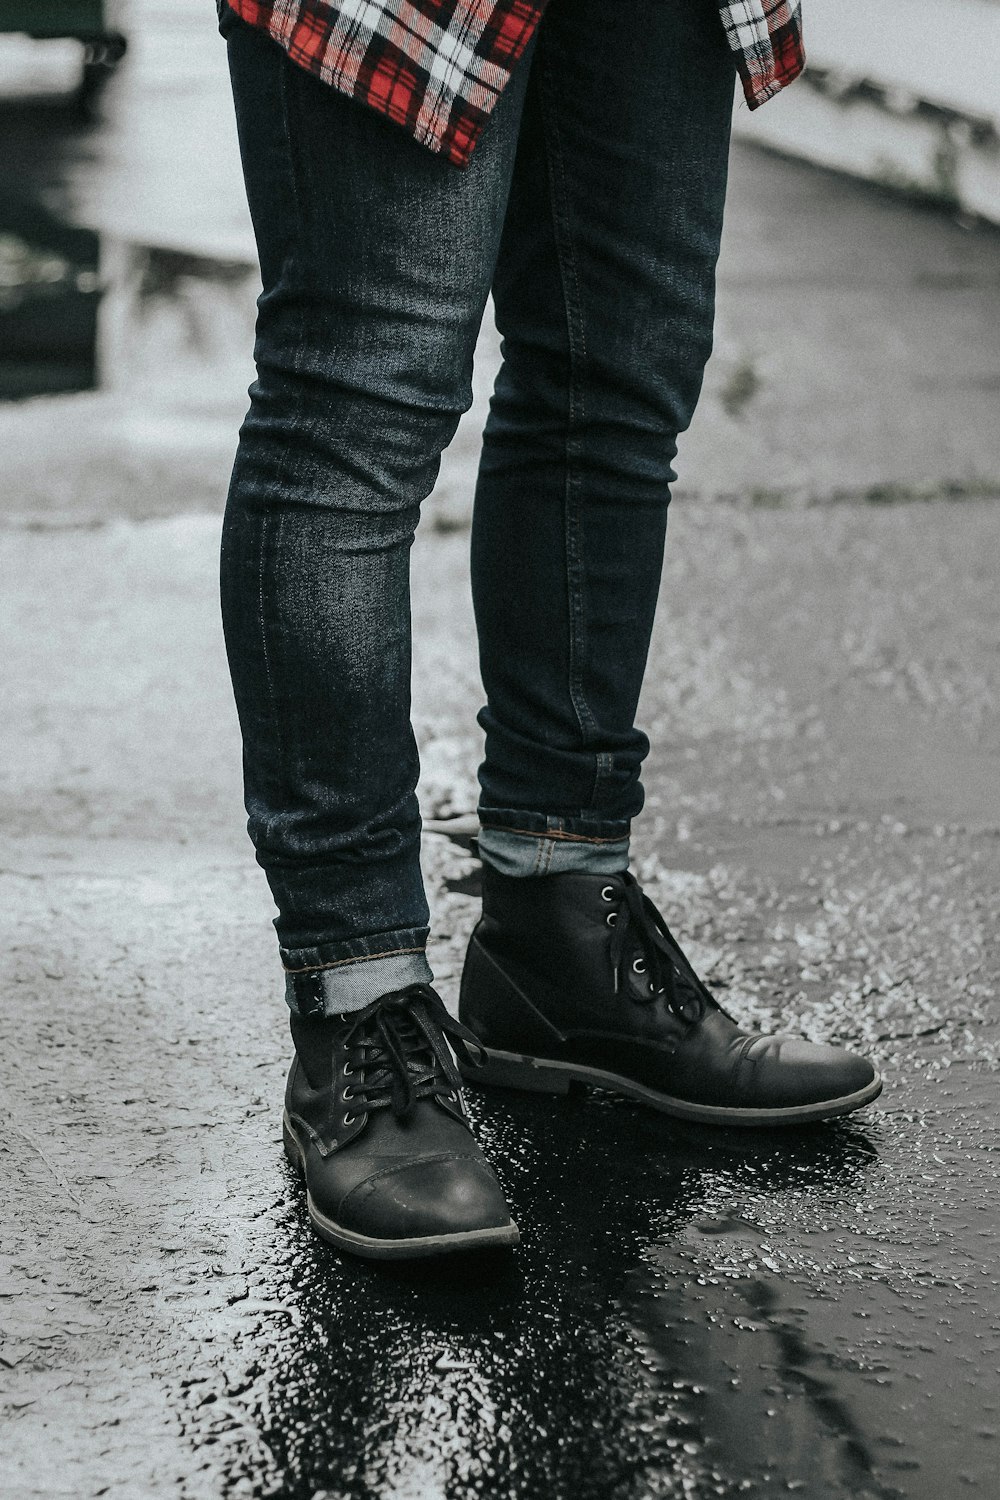 person wearing black denim jeans and pair of black leather boots